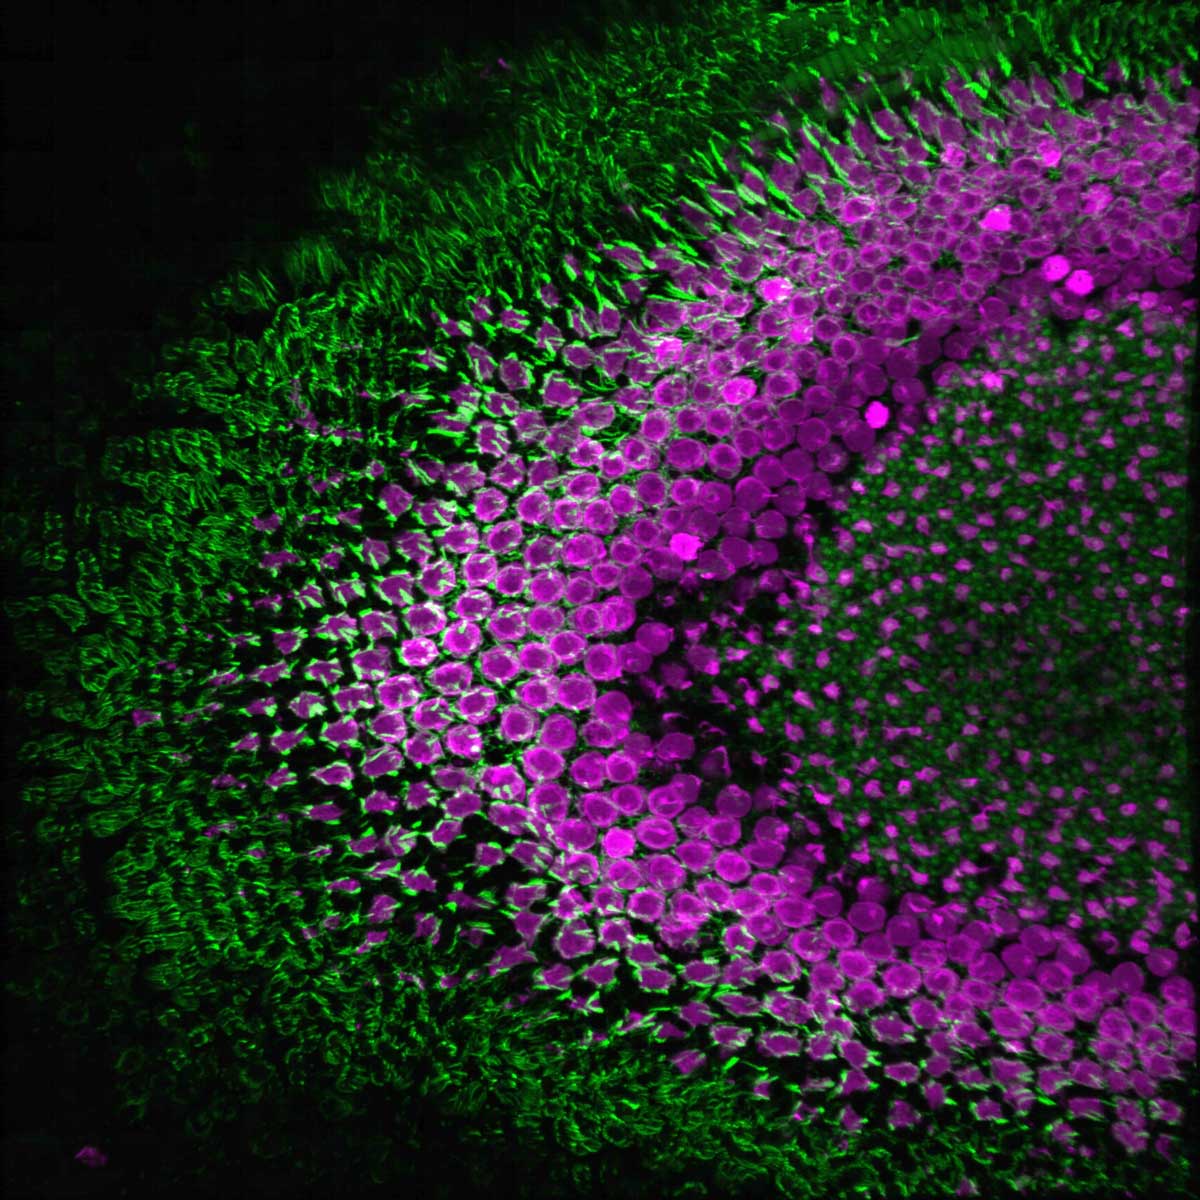 Confocal image of a zebrafish retina stained with fluorescent dyes.